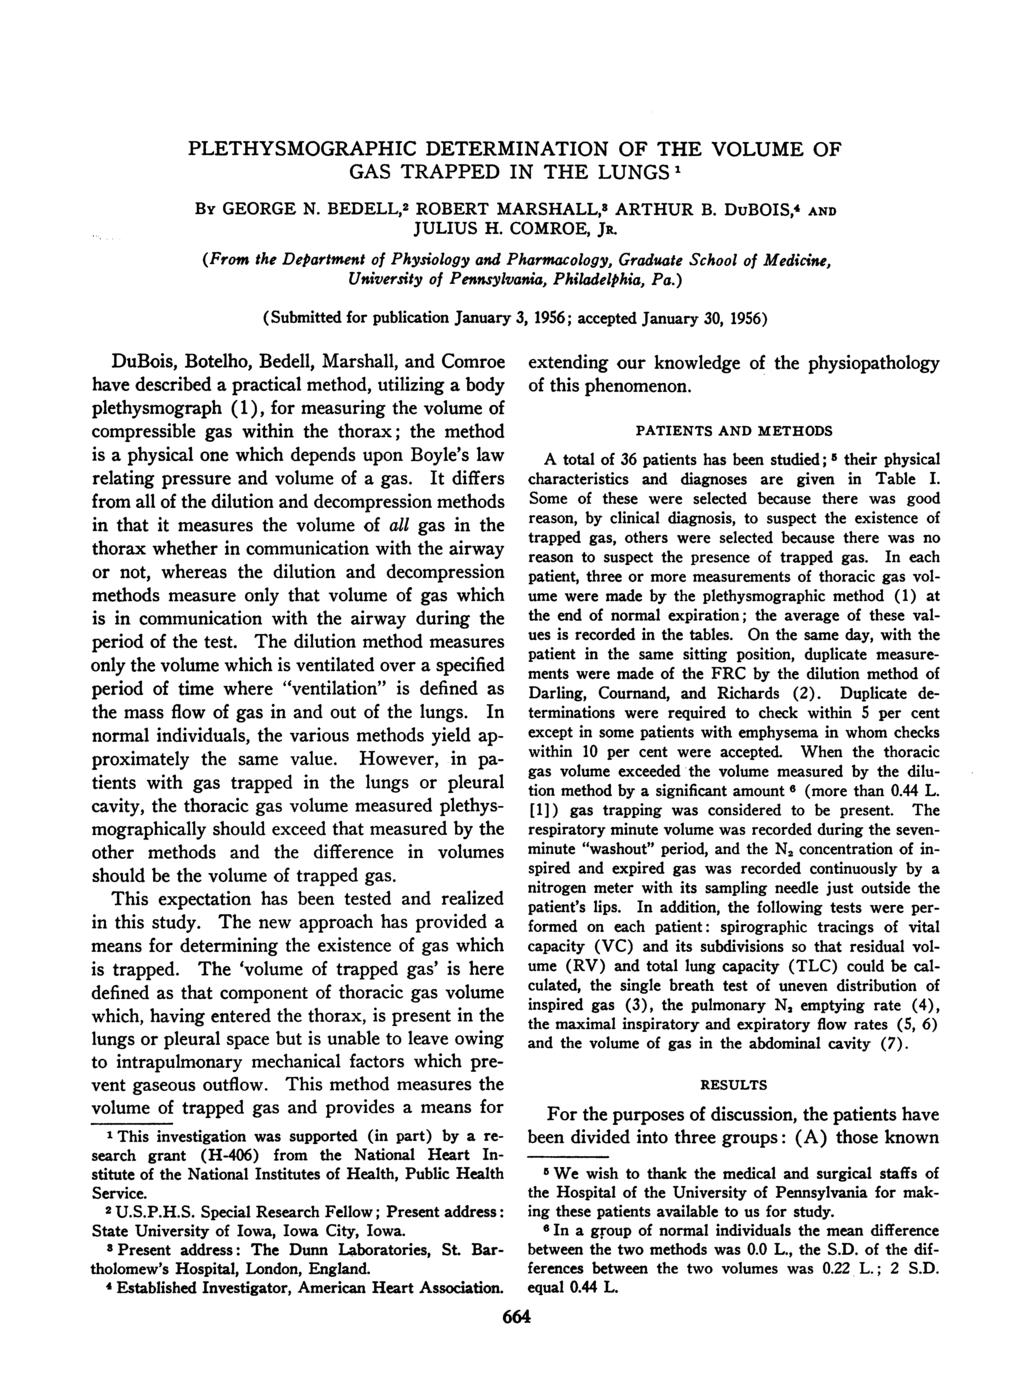 PLETHYSMOGRAPHIC DETERMINATION OF THE VOLUME OF GAS TRAPPED IN THE LUNGS 1 By GEORGE N. BEDELL,2 ROBERT MARSHALL,8 ARTHUR B. DuBOIS,4 AND JULIUS H. COMROE, JR.